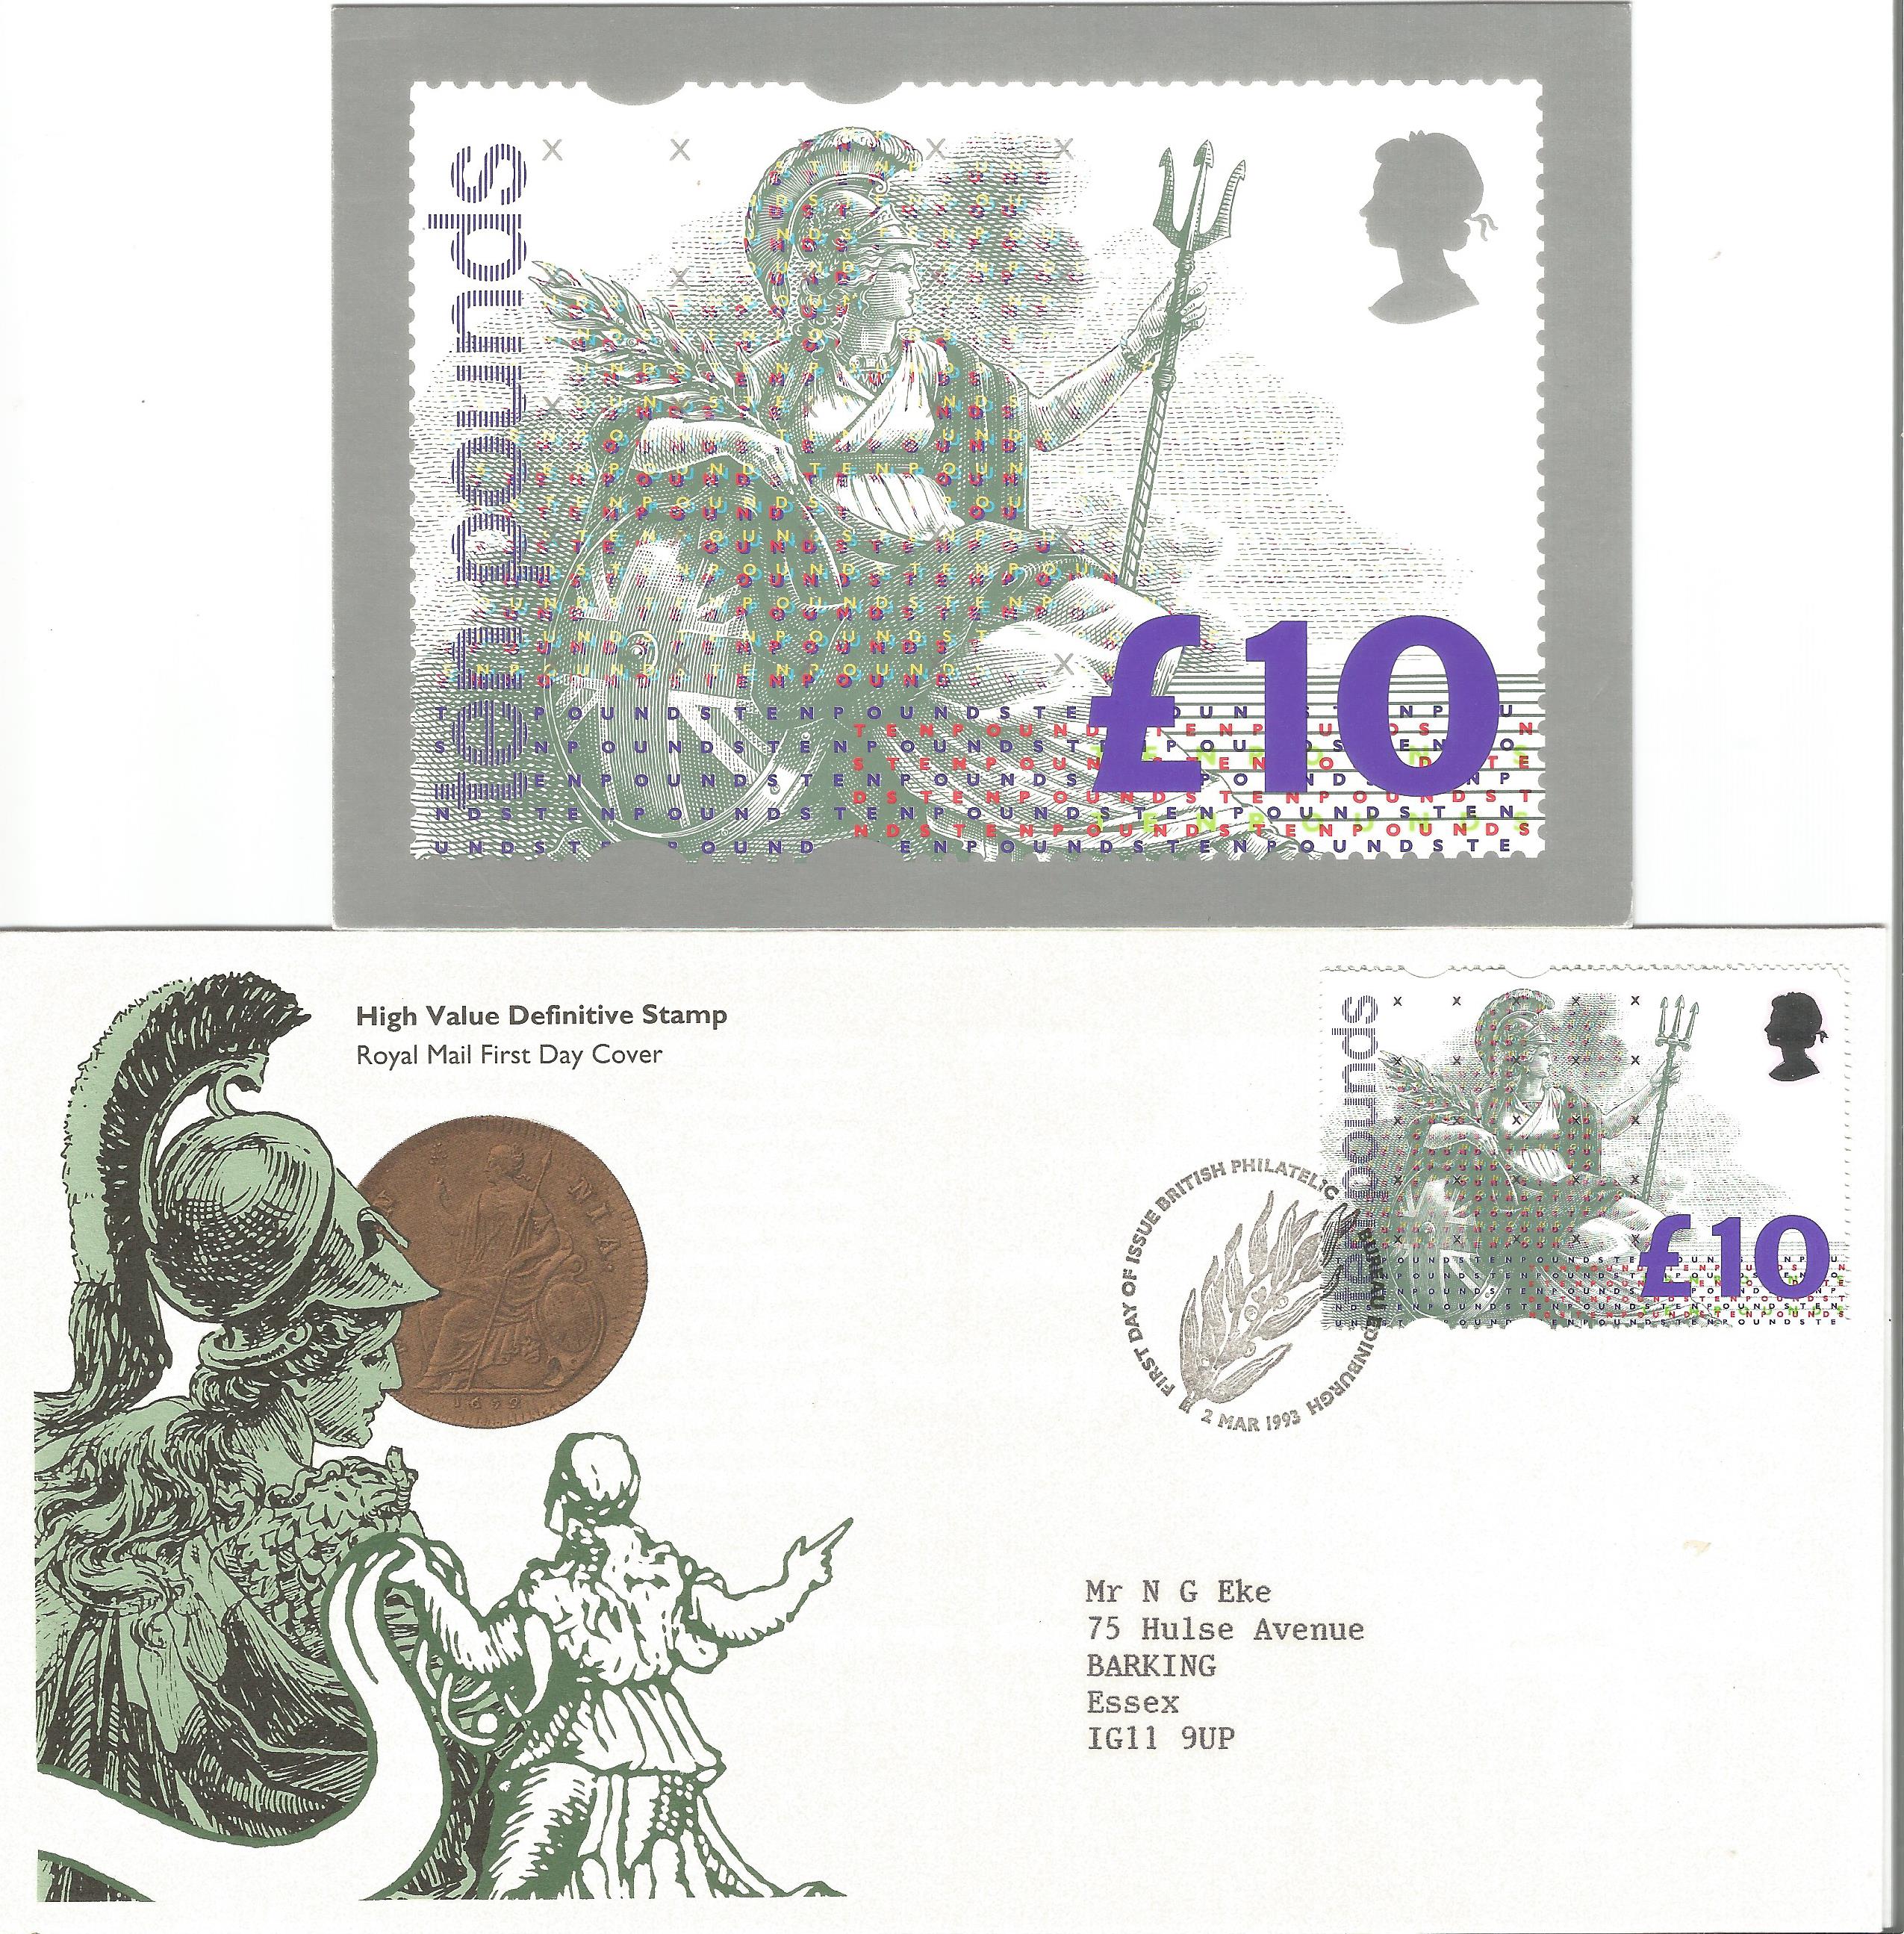 2 x High Value Definitive Stamp FDC £10 High Value Definitive (Britannia) with Stamps and